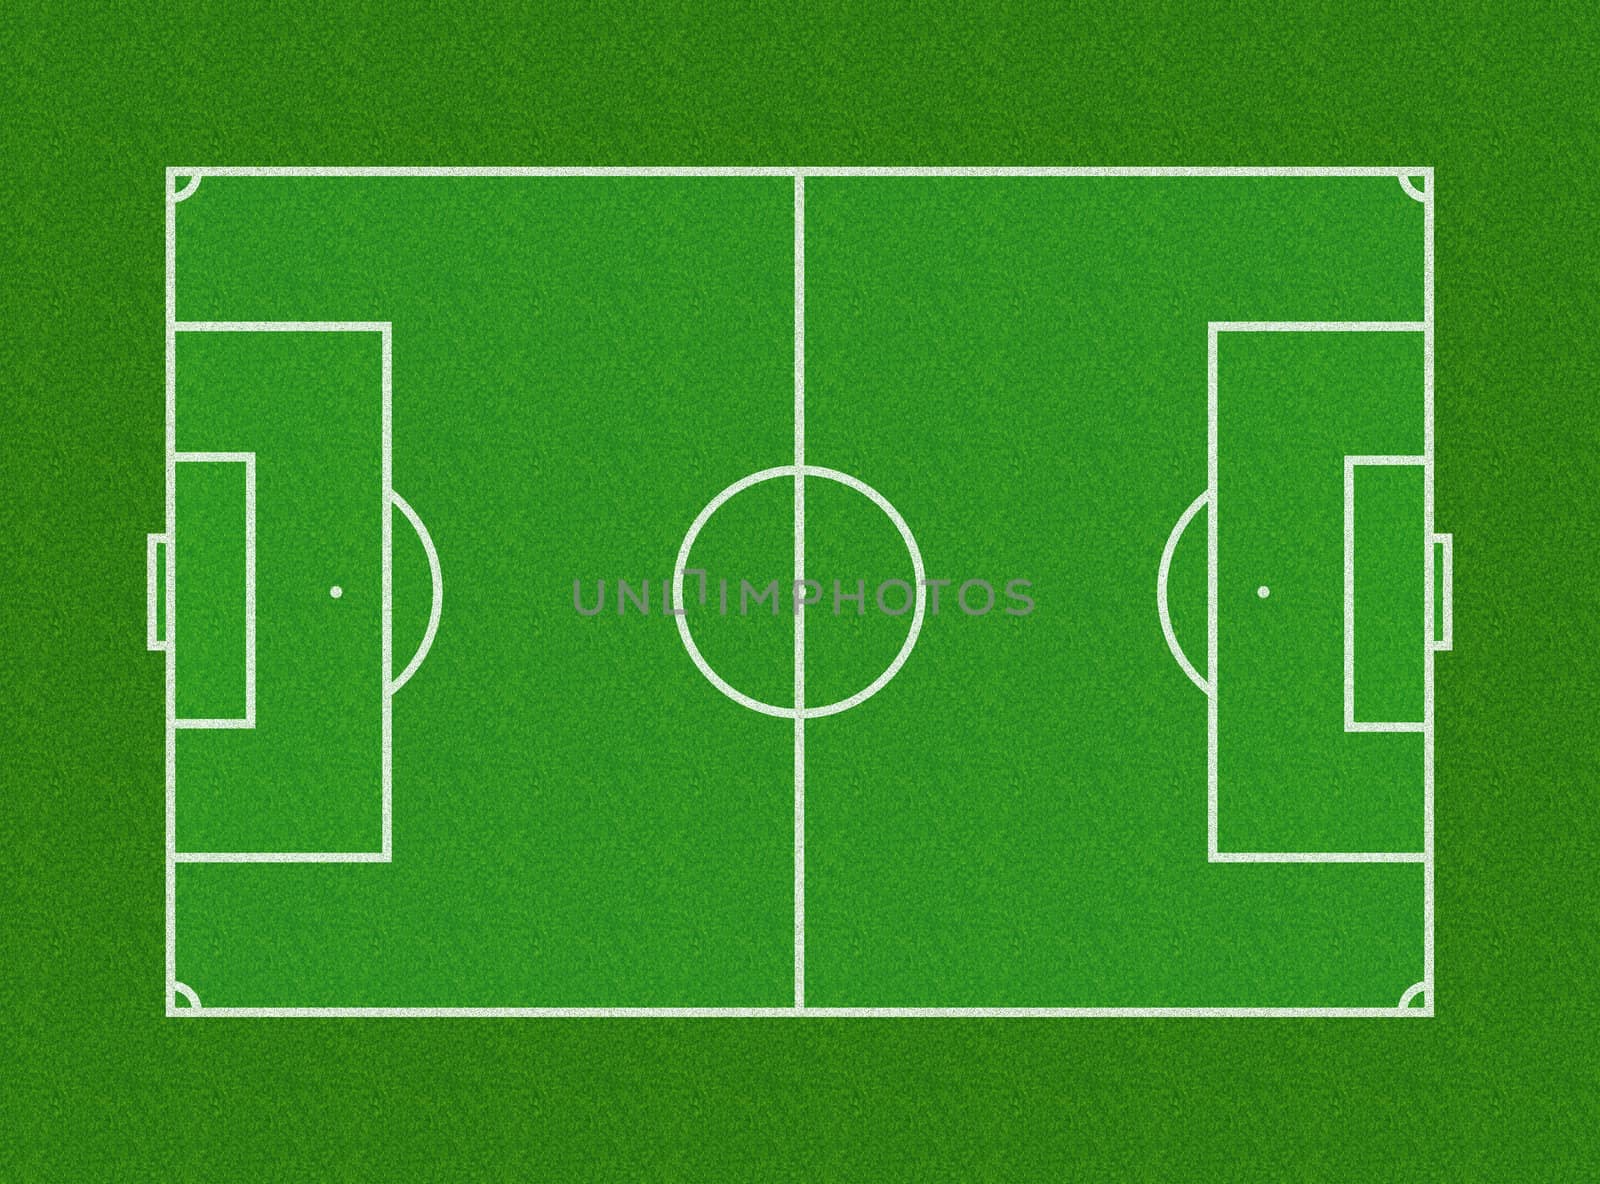 Illustration of Football Field - Aerial View